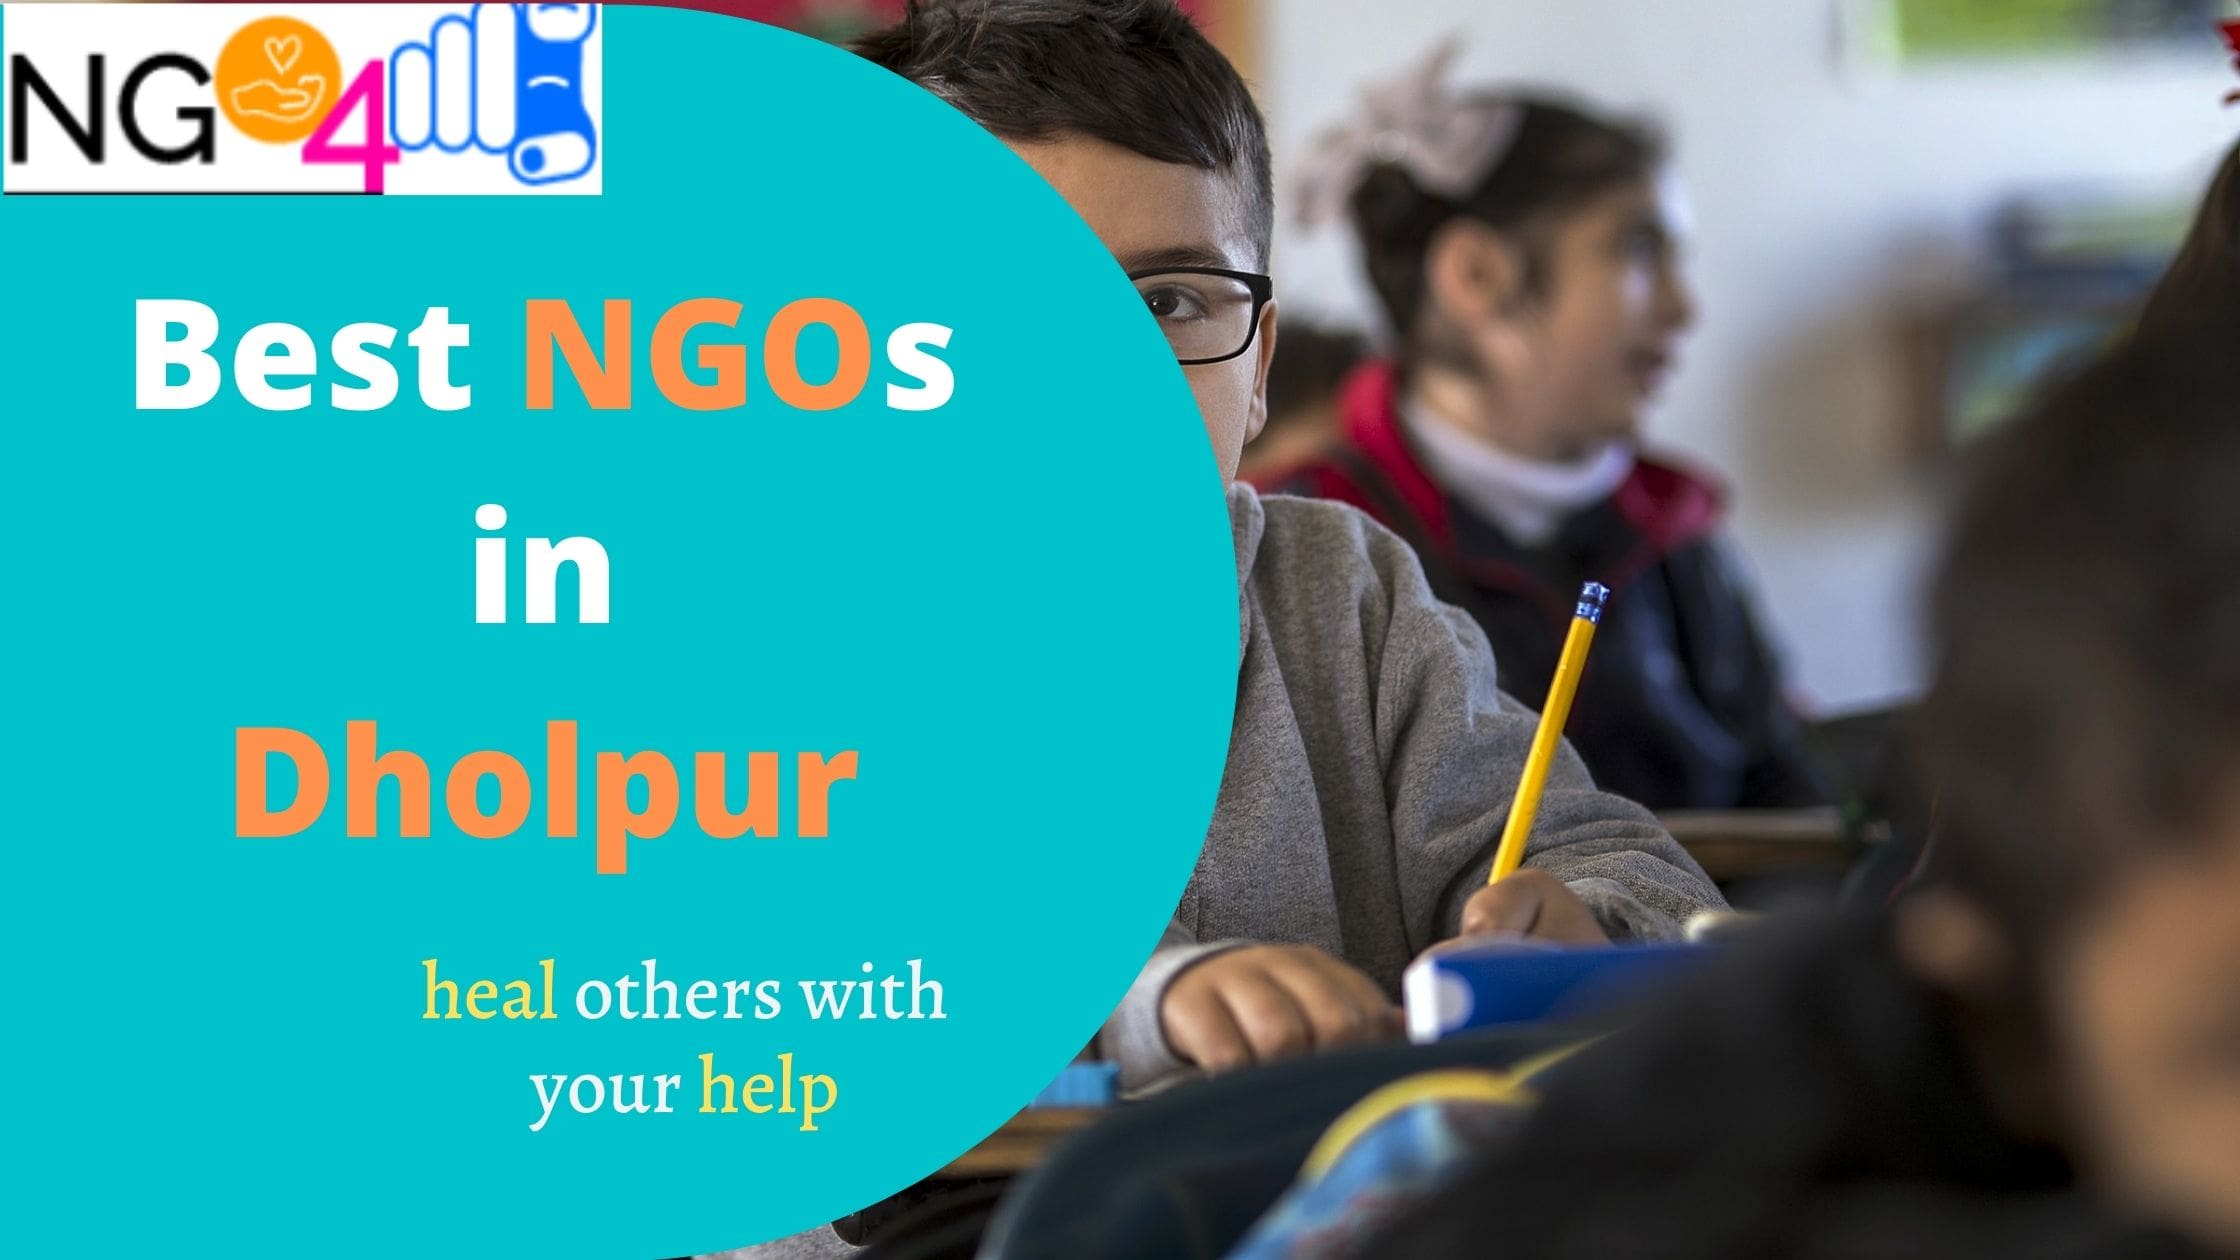 NGO in Dholpur